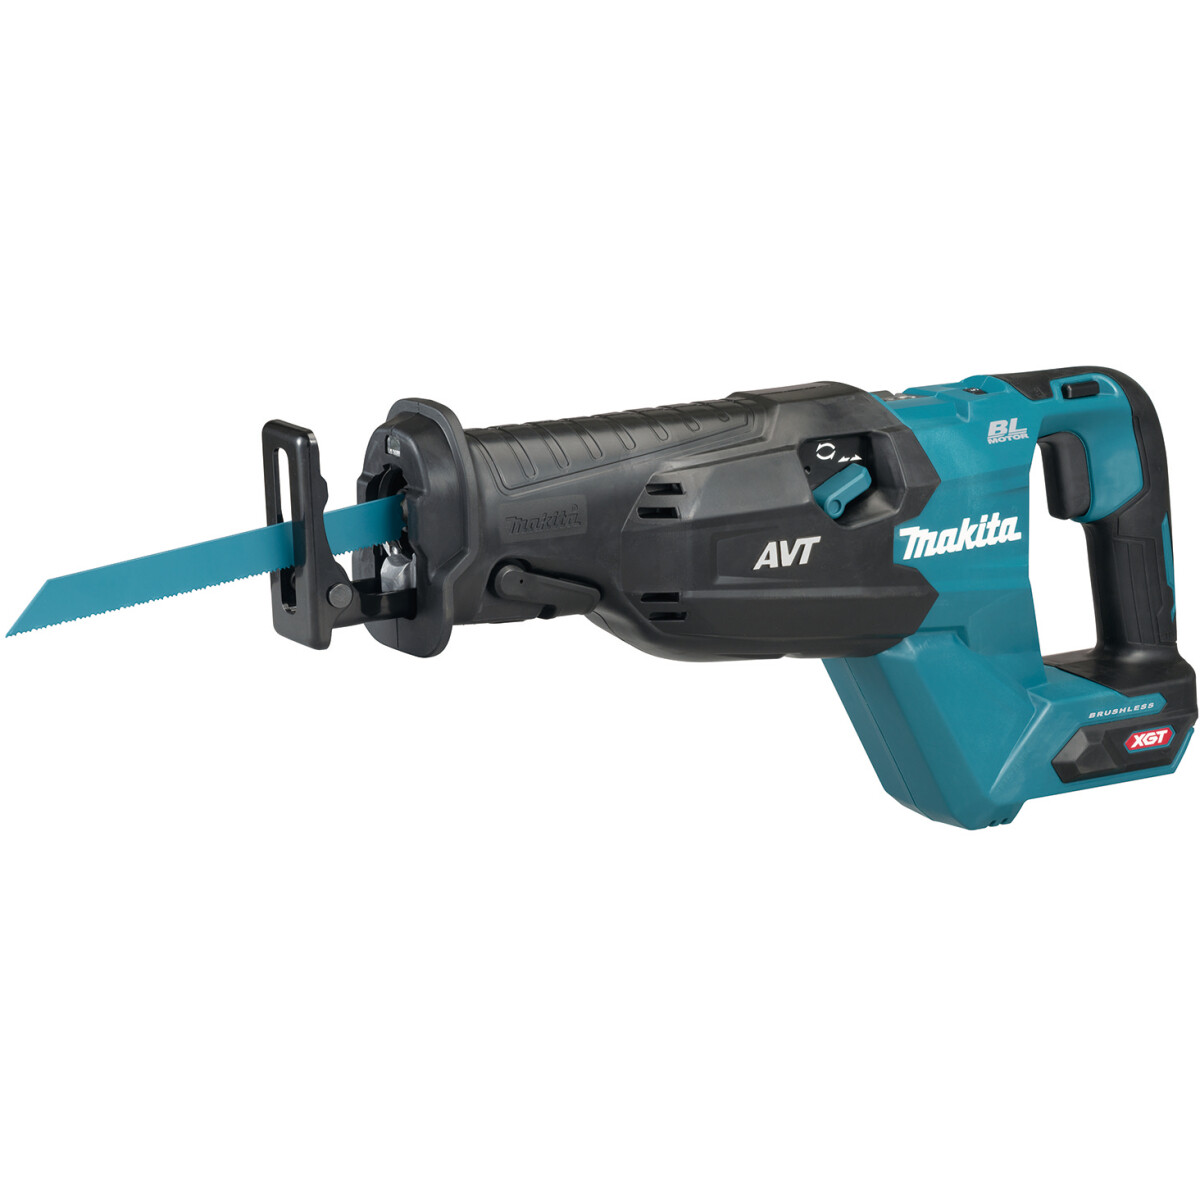 Makita JR002GZ Body Only 40V Brushless Reciprocating Saw from Lawson HIS